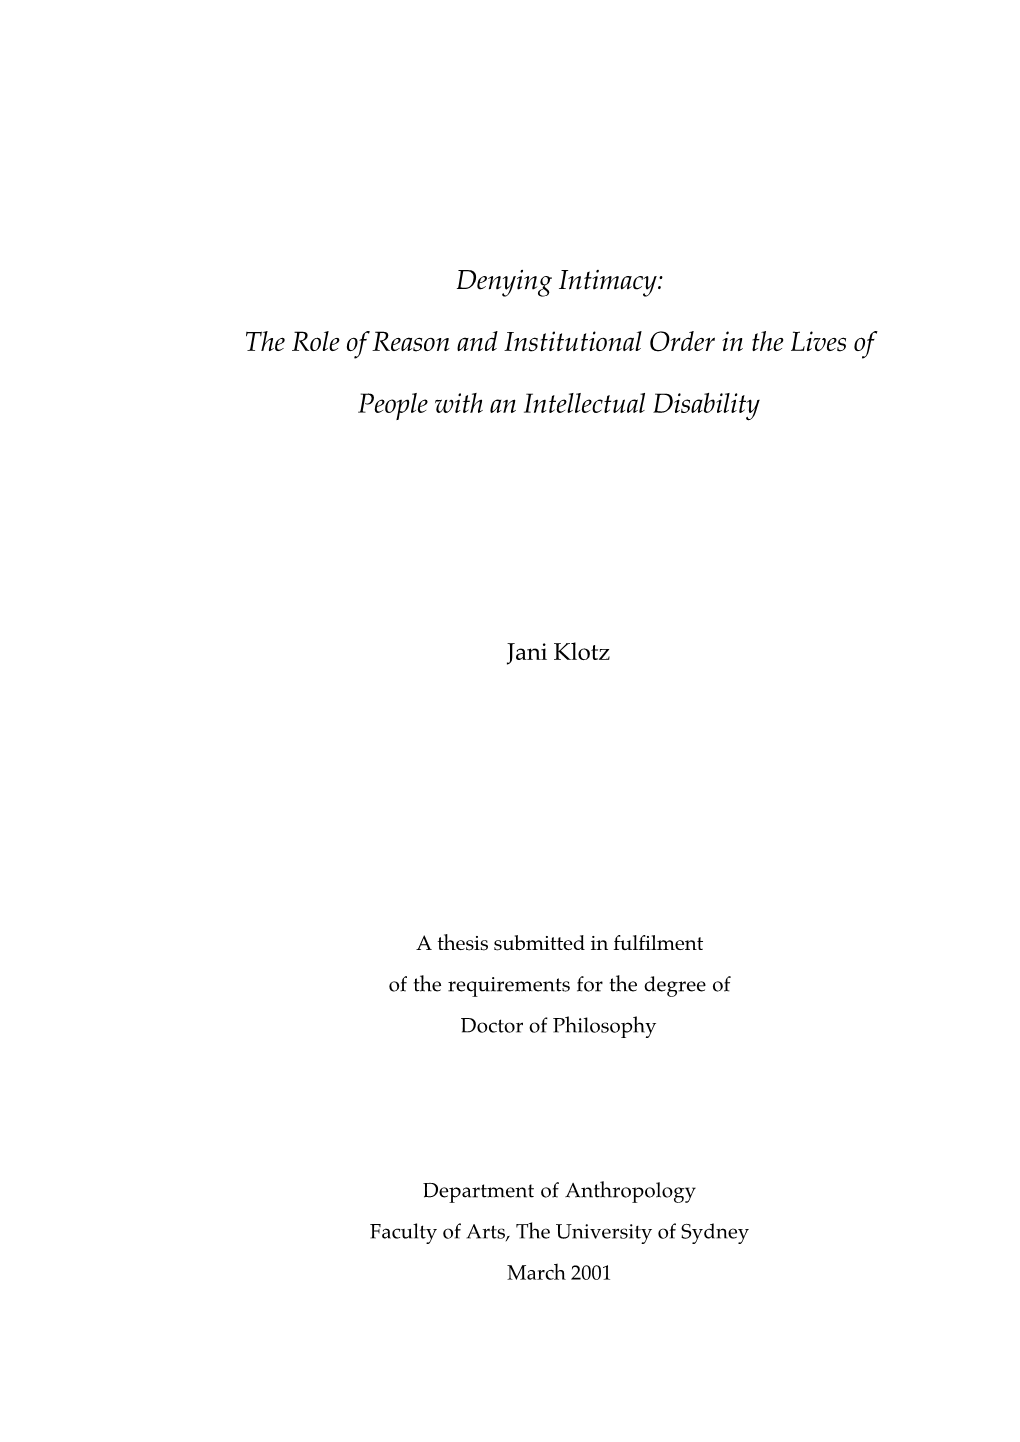 Denying Intimacy: the Role of Reason and Institutional Order in the Lives of People with Intellectual Disabilities